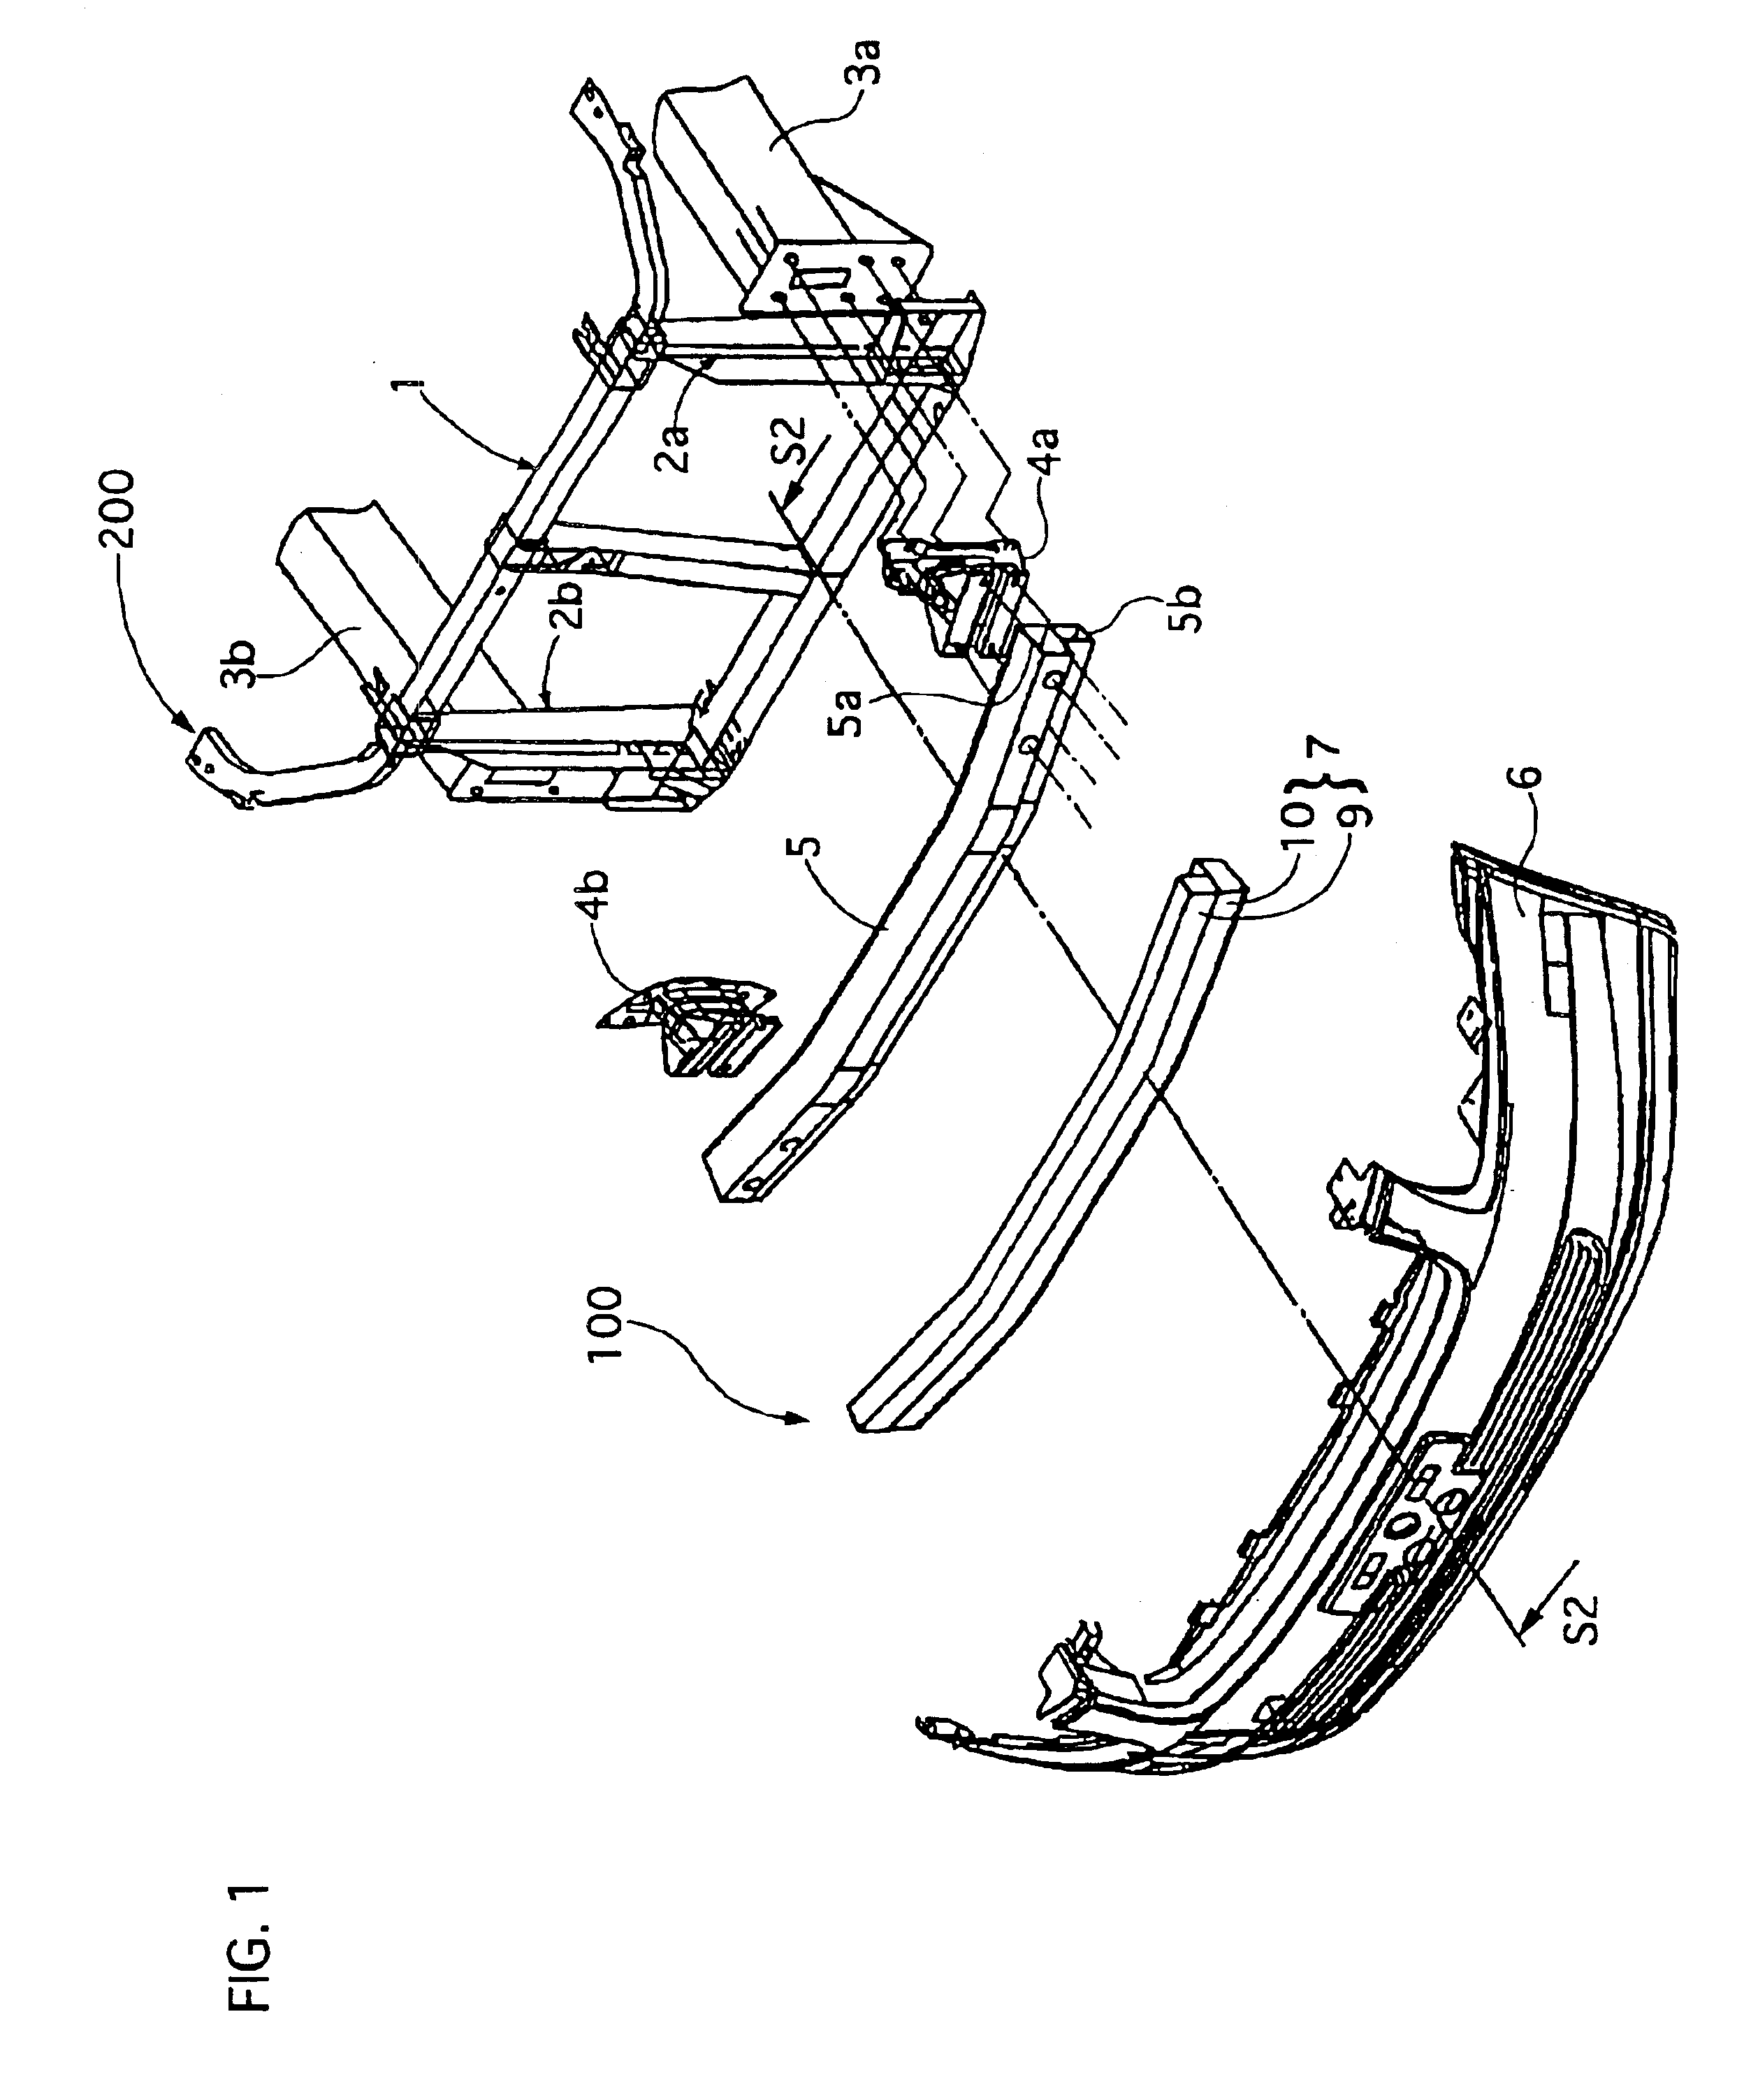 Bumper structure for a motor vehicle